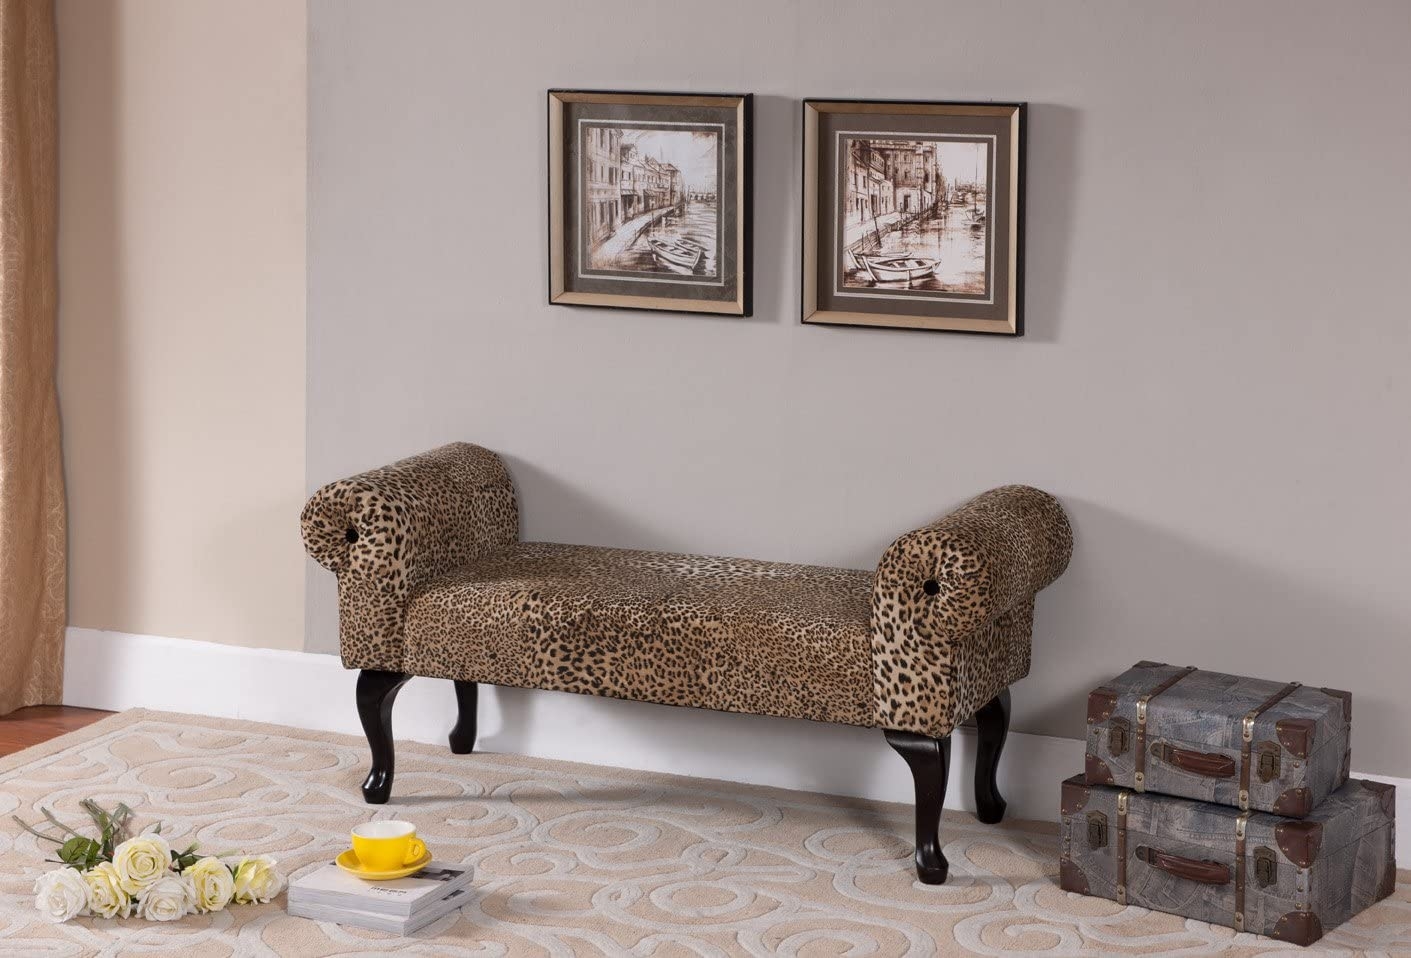 This gorgeous leopard print bench would be a talking point